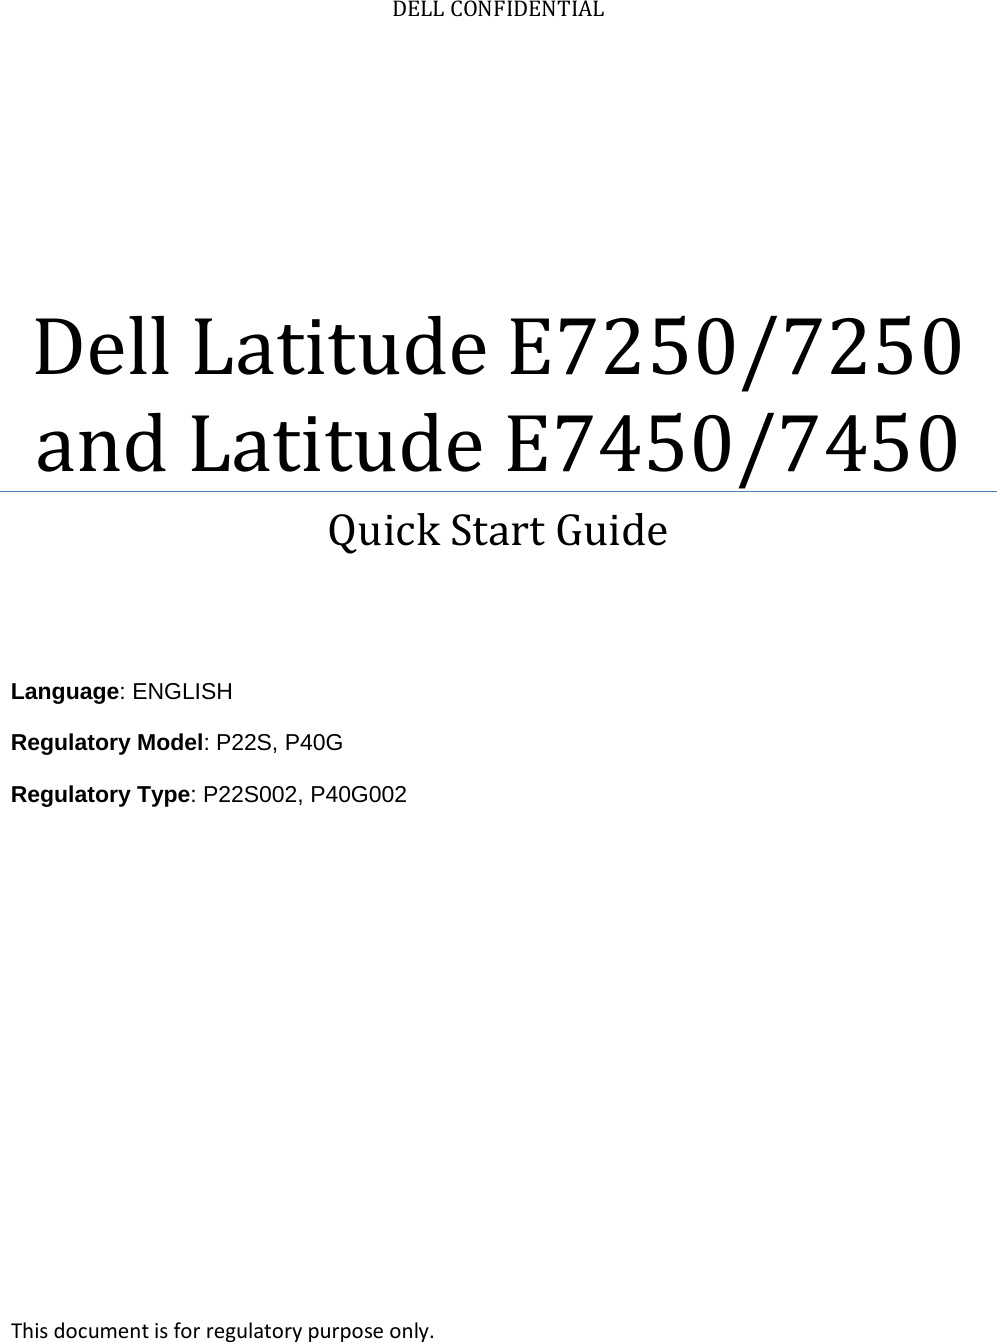 DELL CONFIDENTIAL Dell Latitude E7250/7250 and Latitude E7450/7450 Quick Start Guide    Language: ENGLISH Regulatory Model: P22S, P40G  Regulatory Type: P22S002, P40G002      This document is for regulatory purpose only. 